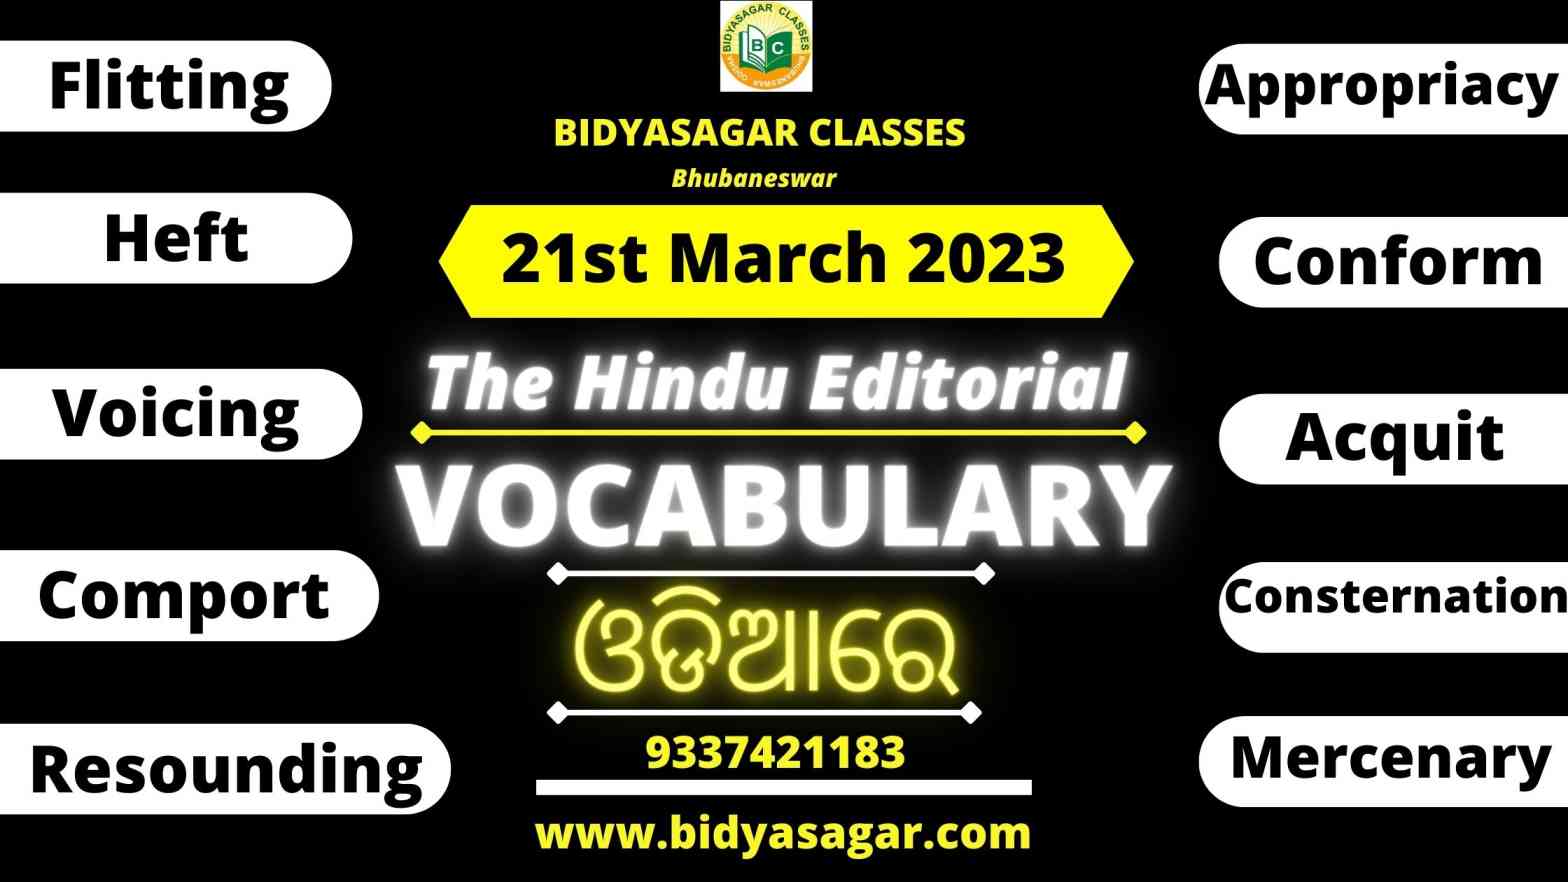 The Hindu Editorial Vocabulary of 21st March 2023